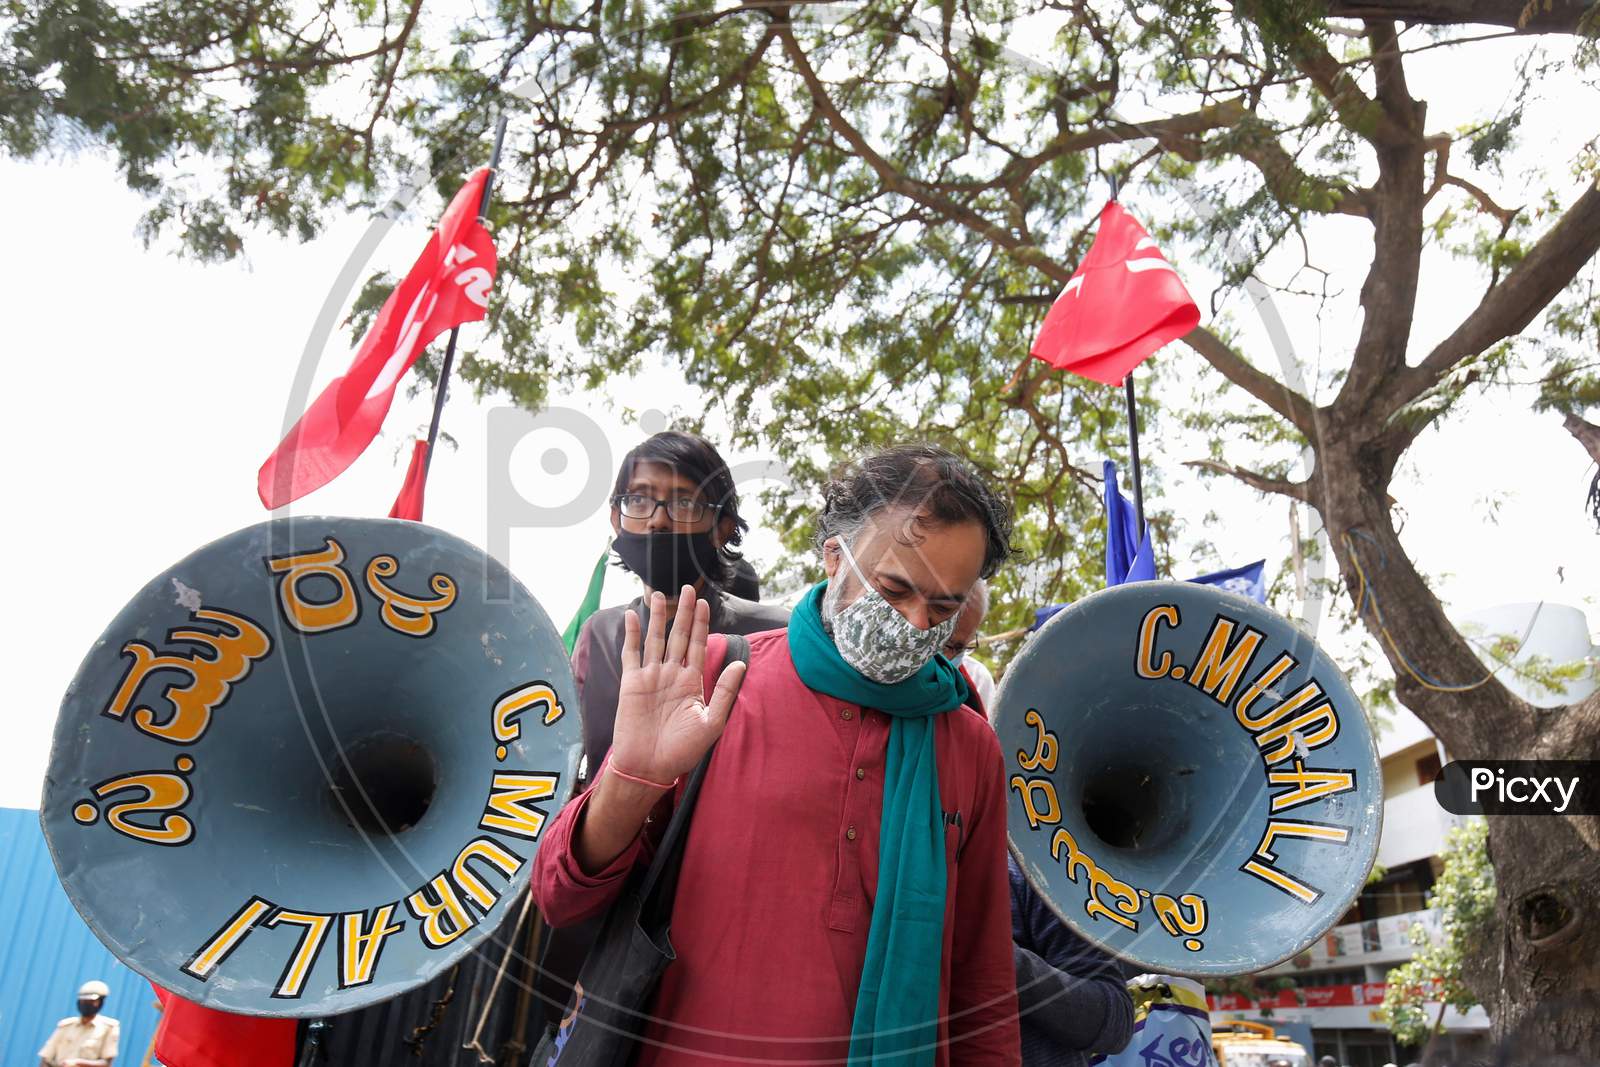 Yogendra Yadav, national President of Swaraj Abhiyan and political activist greets his supporters as he arrives to participate in a protest against the passage of two controversial farm bills by the country’s parliament in Bangalore, India.